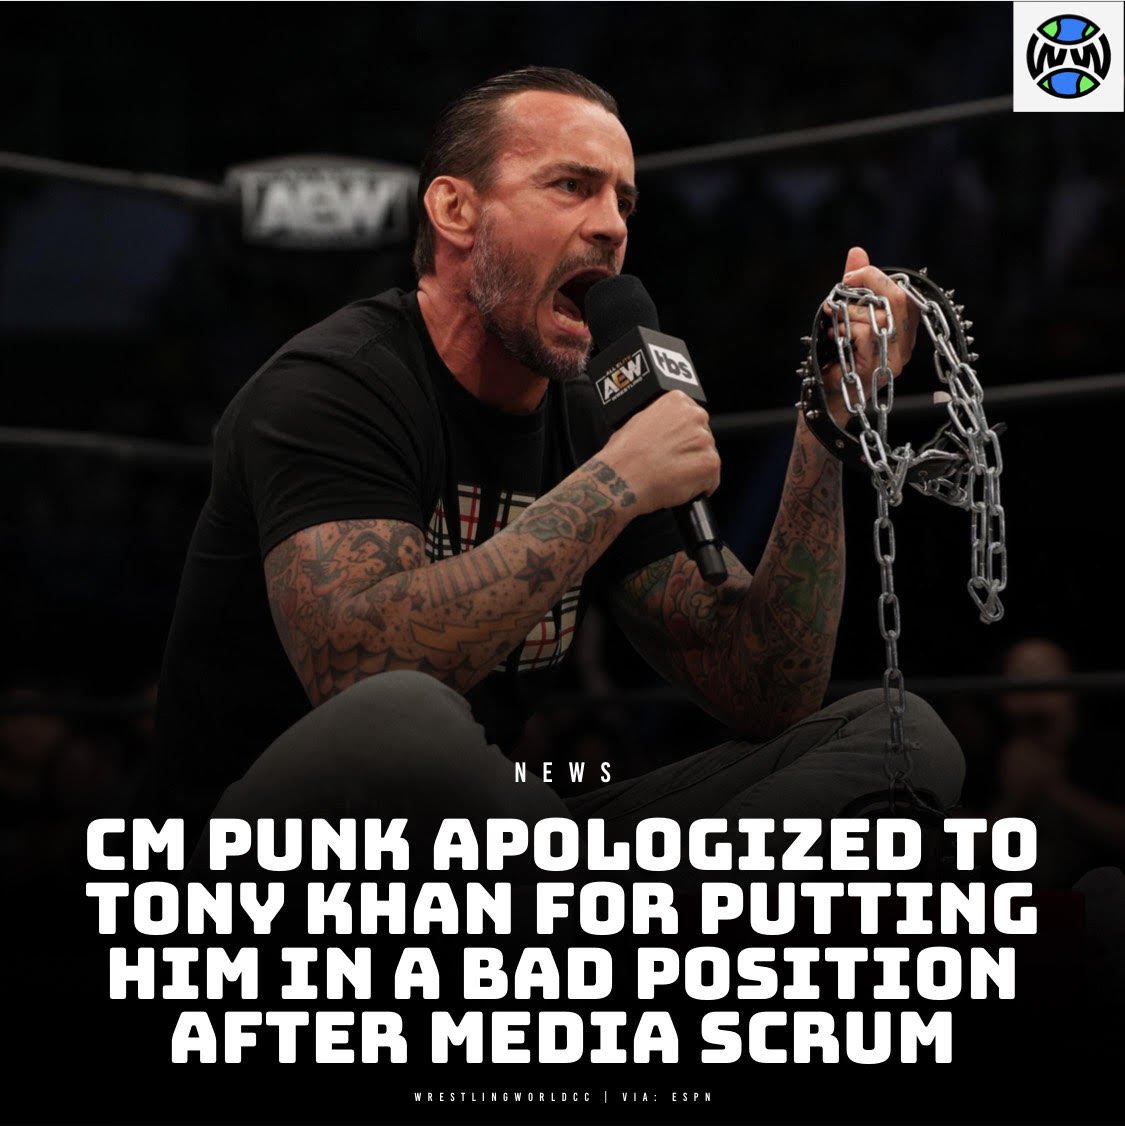 CM Punk apologized to Tony Khan for the scrum